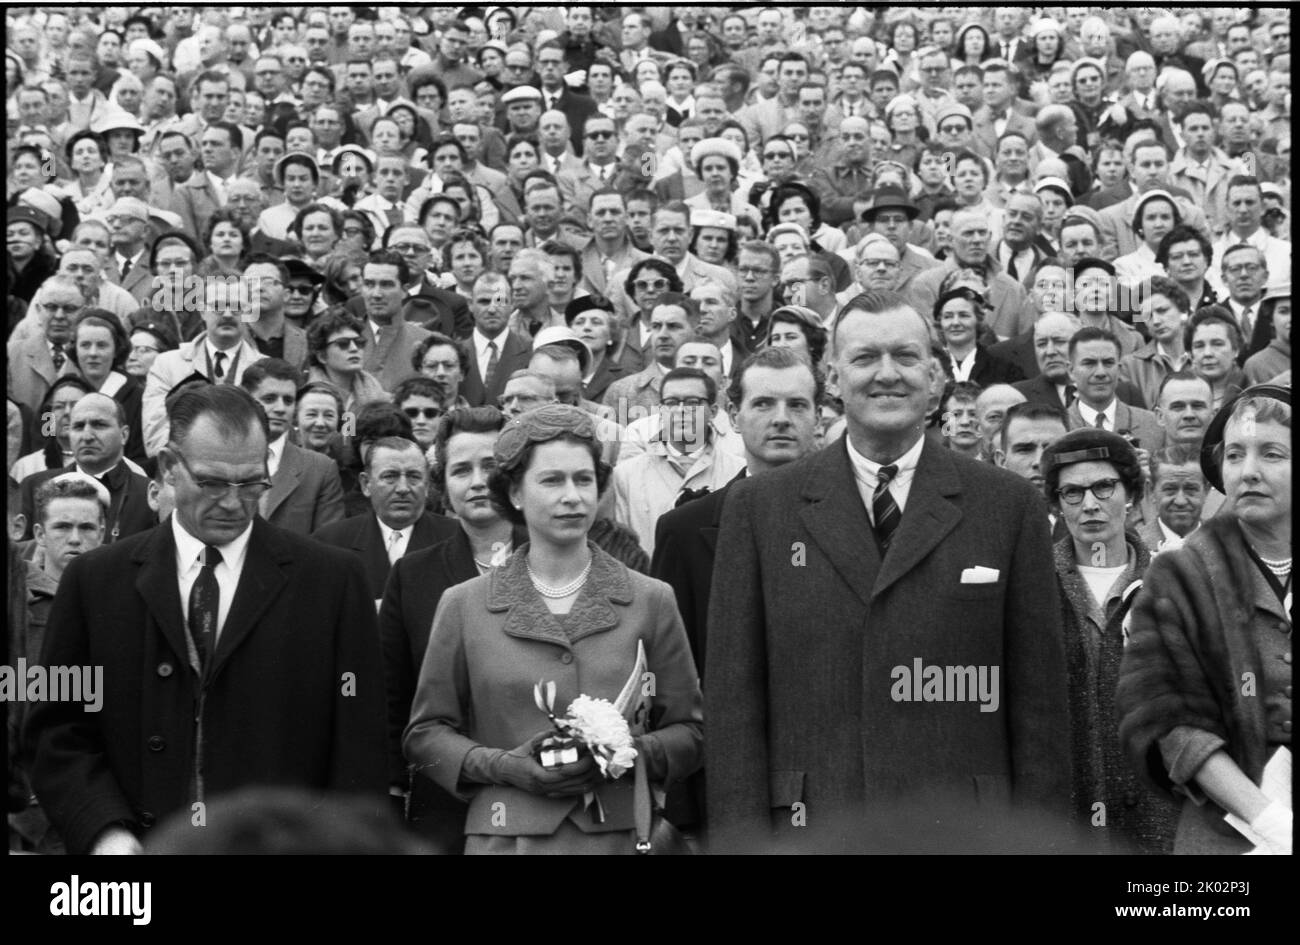 Queen Elizabeth II with Maryland governor Theodore McKeldin (right) and University of Maryland president Wilson Homer 'Bull' Elkins (left), at a Maryland Terrapins vs. the North Carolina Tar Heels  football game in College Park, Maryland.  Oct. 19 1957. Stock Photo